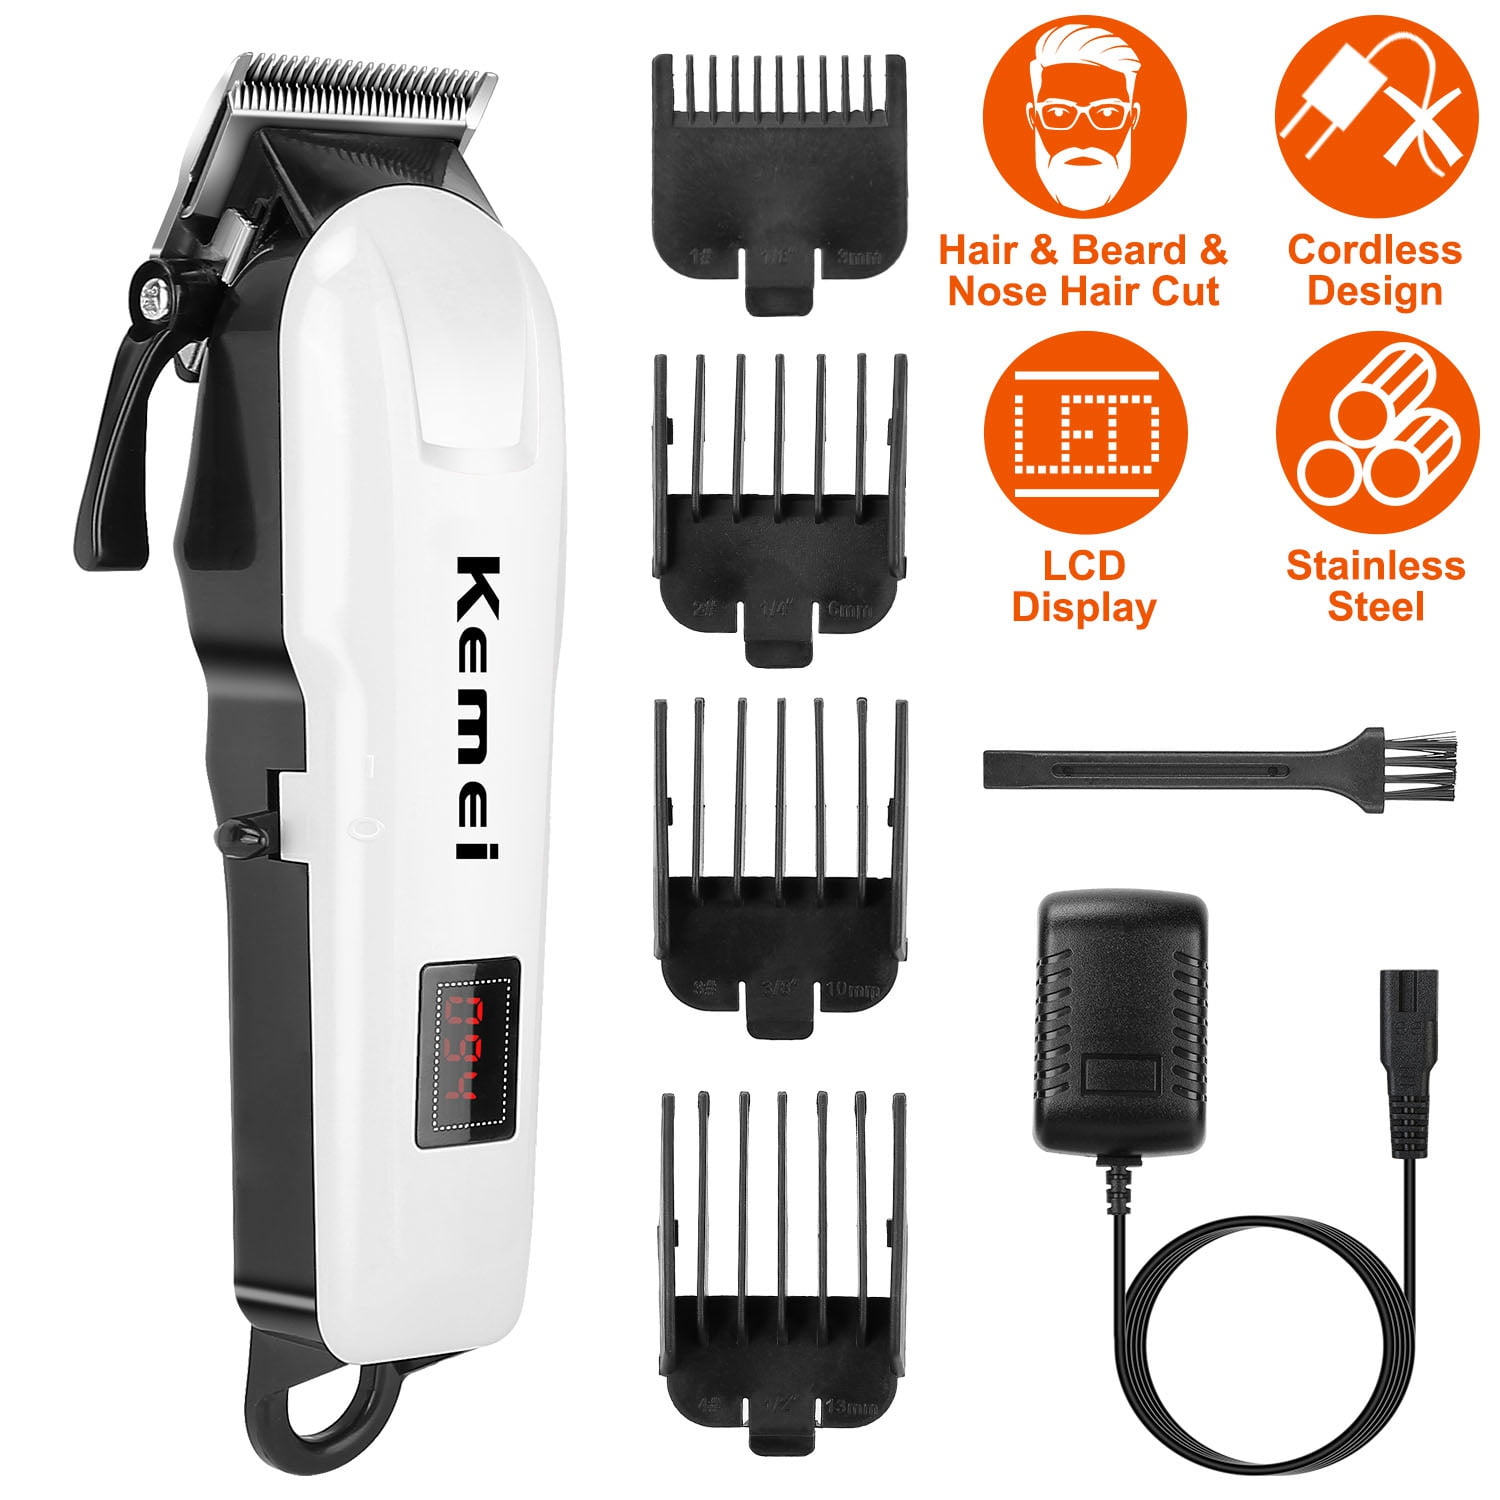 Hair Trimmer Corded Hair Cutting Kit for ,Rechargeable Home Haircut Walmart.com